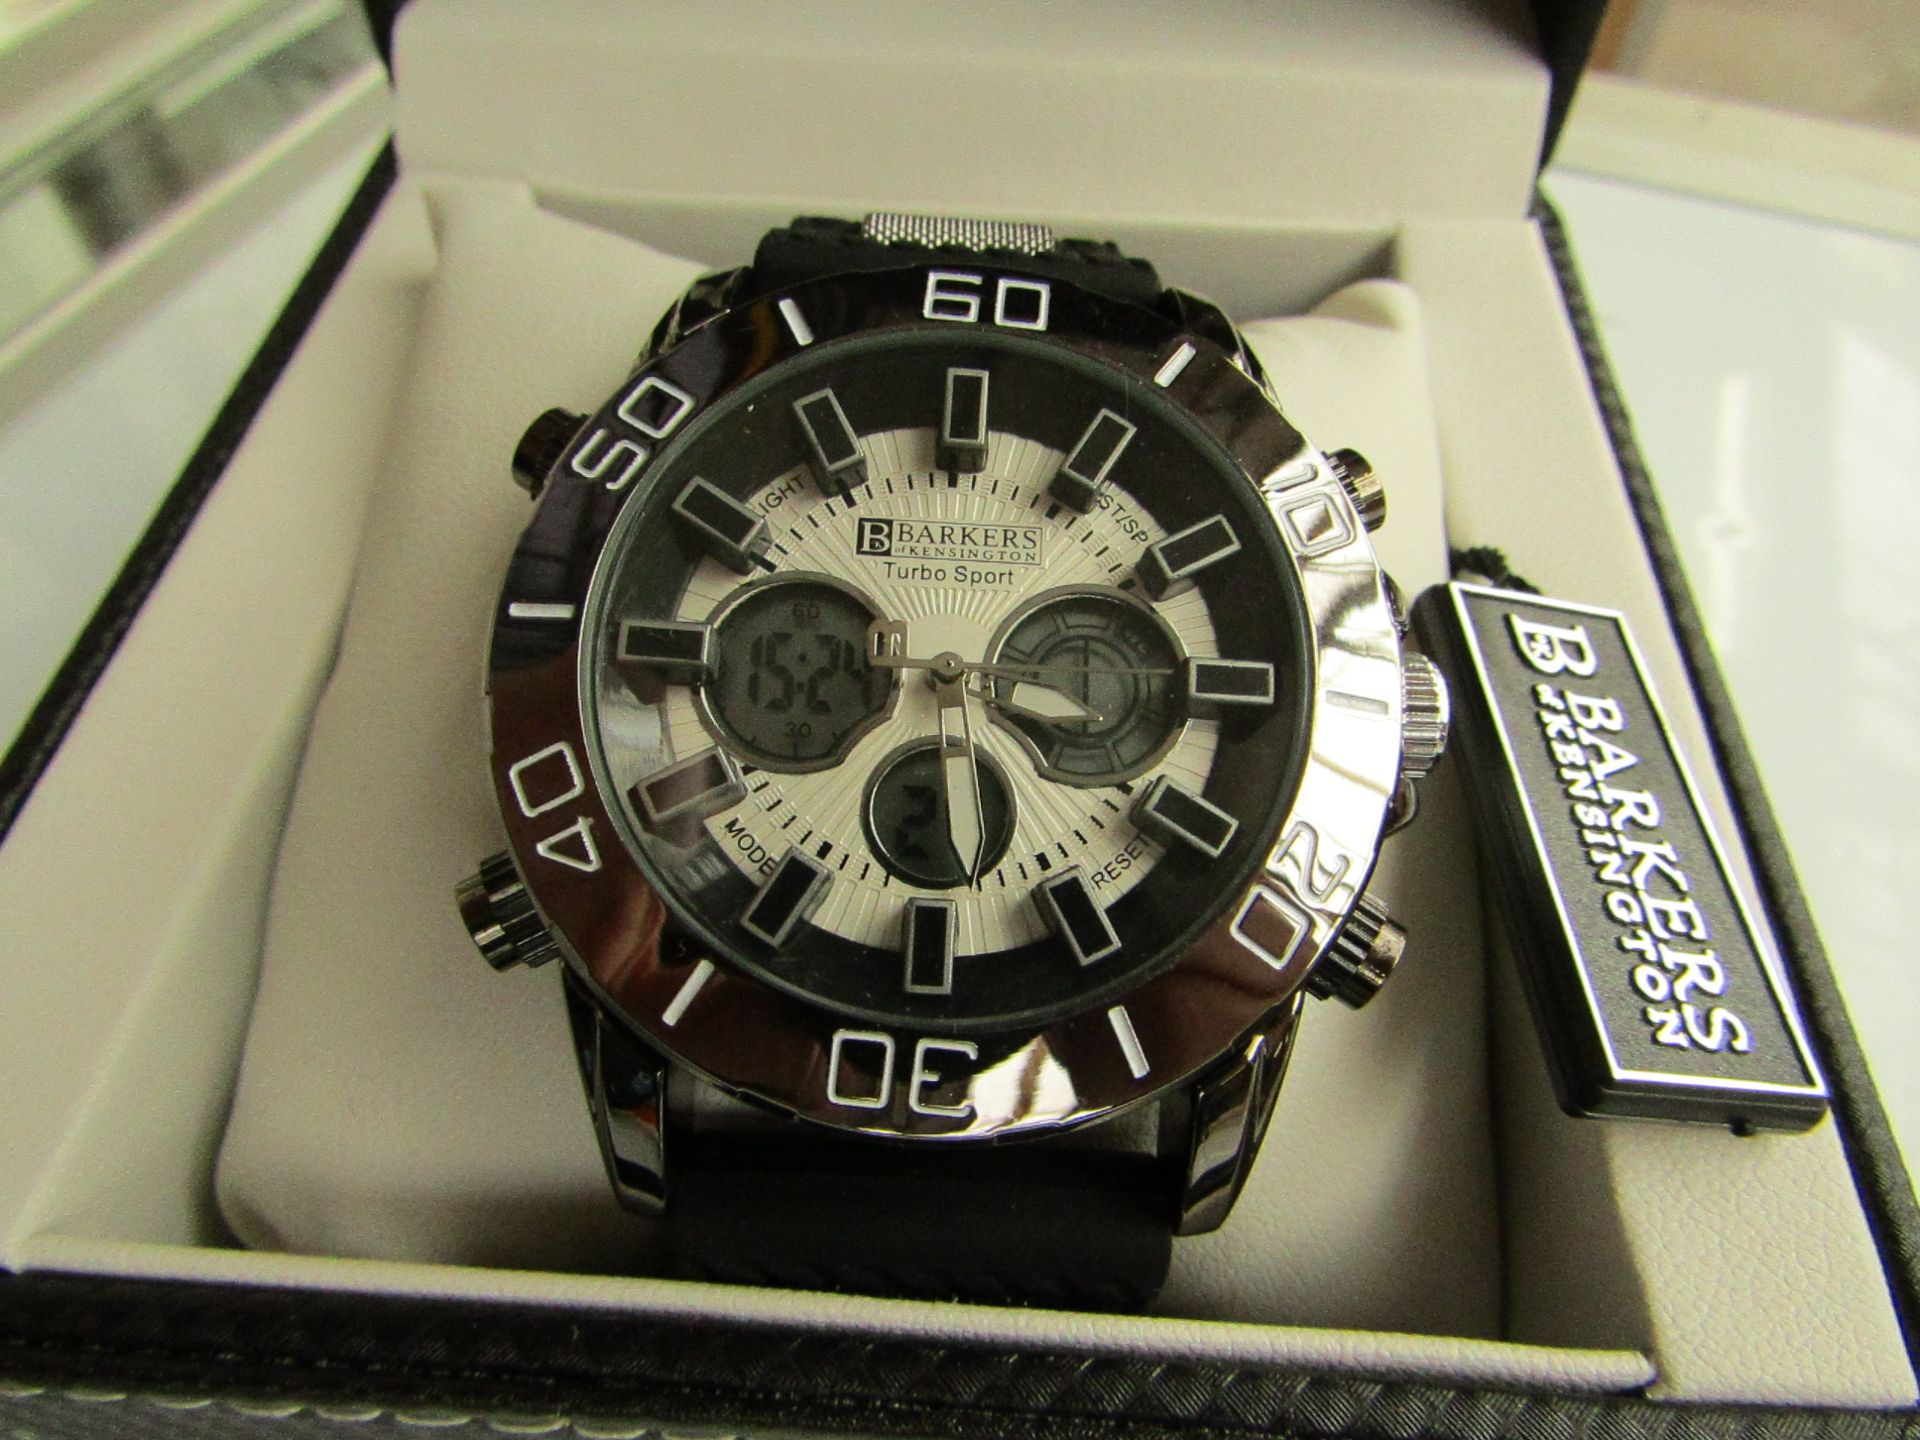 Model: Turbo Sport (SRP GBP425) Condition: Brand new with box, tags and 5-yr manufacturer’s warranty